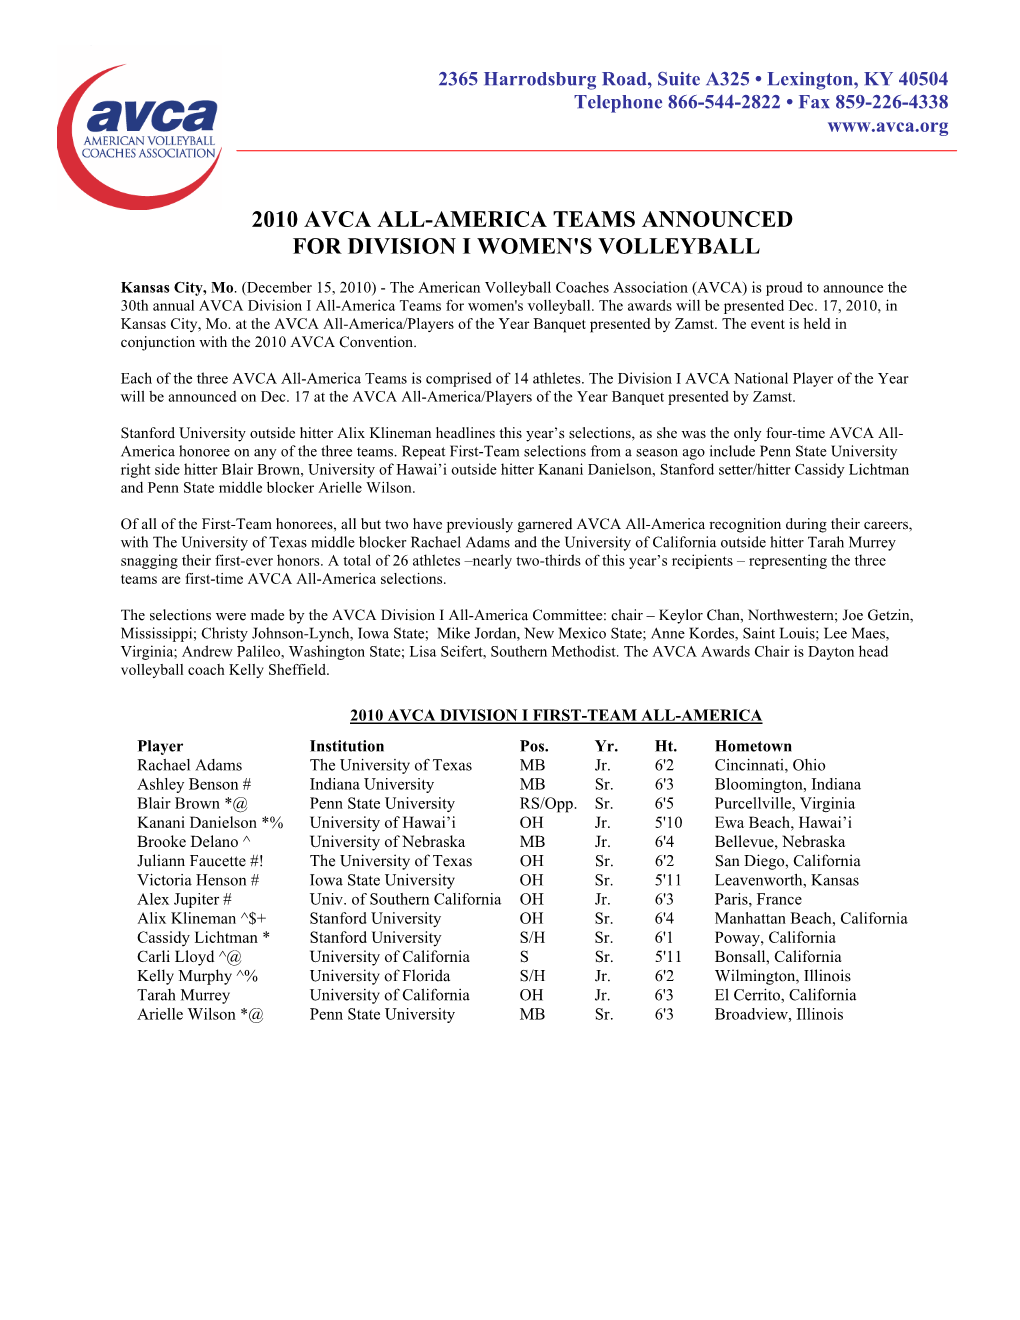 2010 Avca All-America Teams Announced for Division I Women's Volleyball